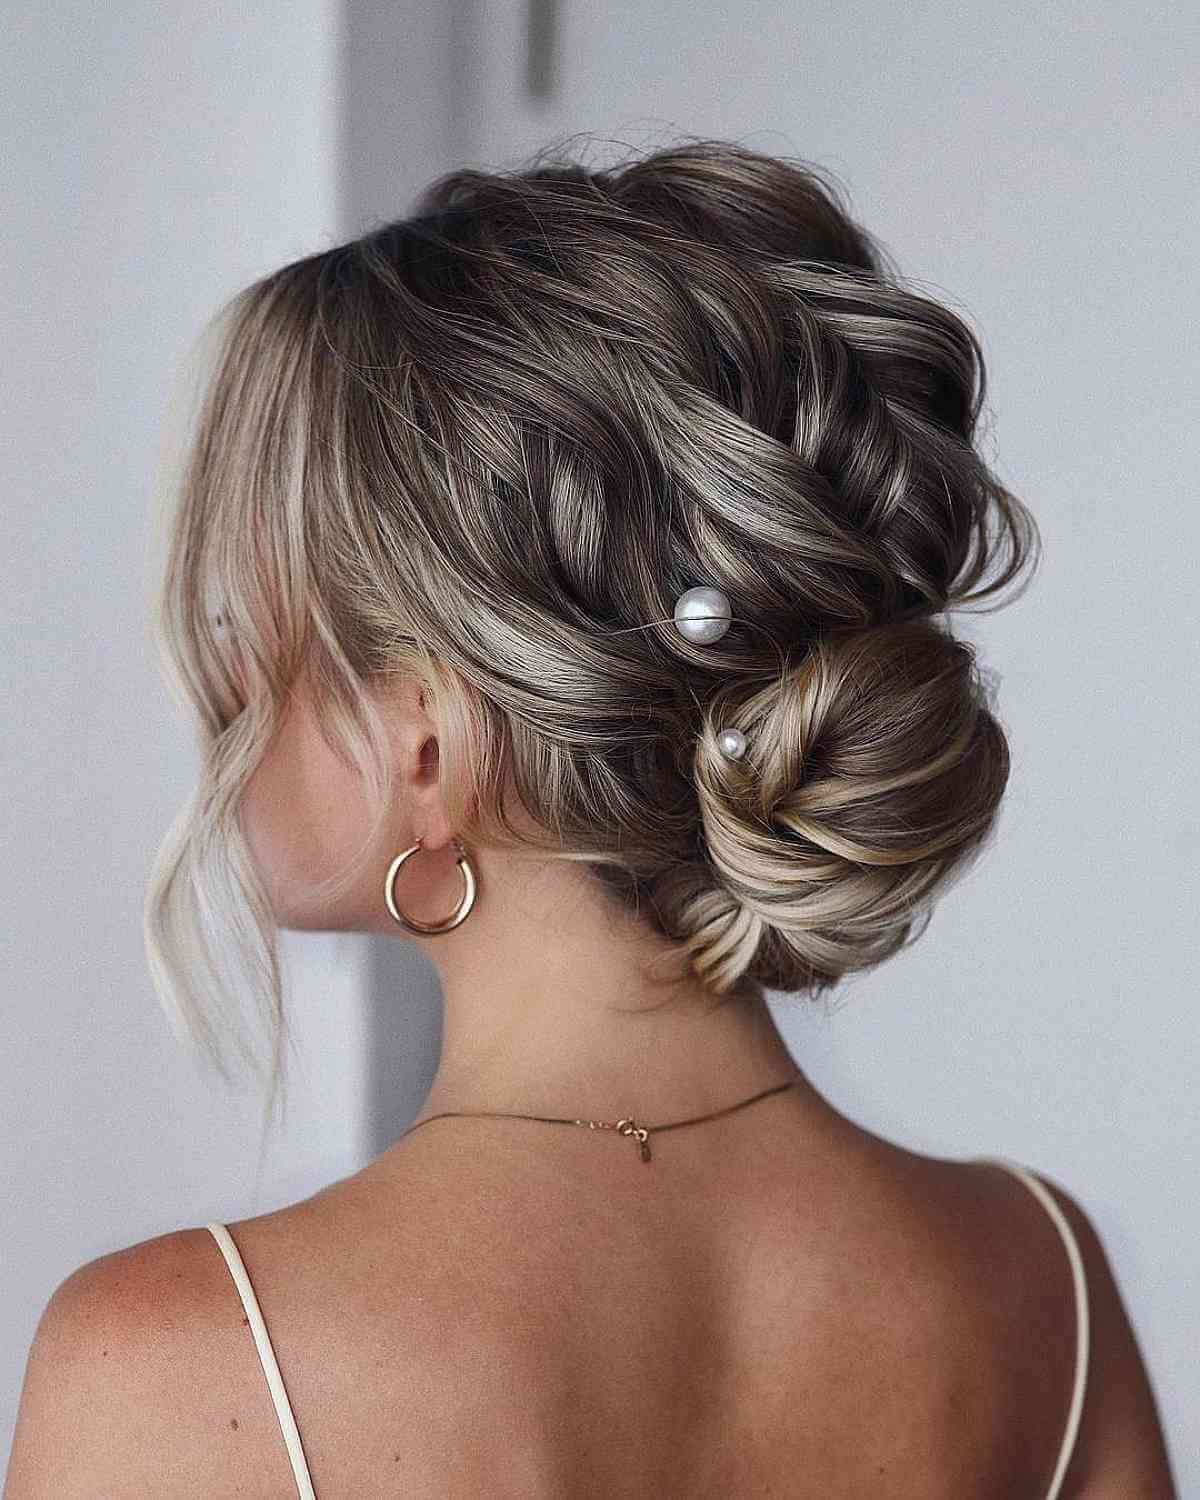 Textured Updo for Date Night